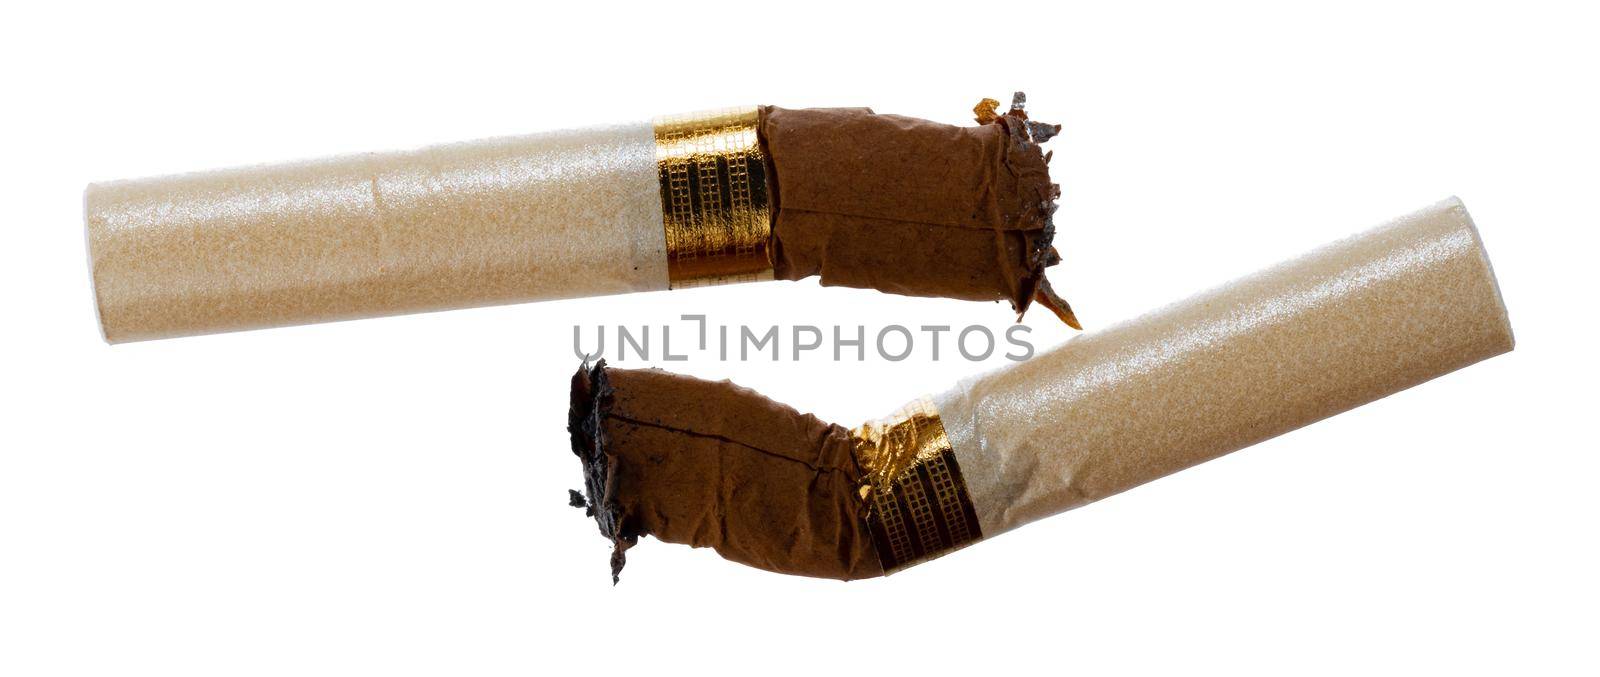 Extinguished cigarette butt isolated on white background close up